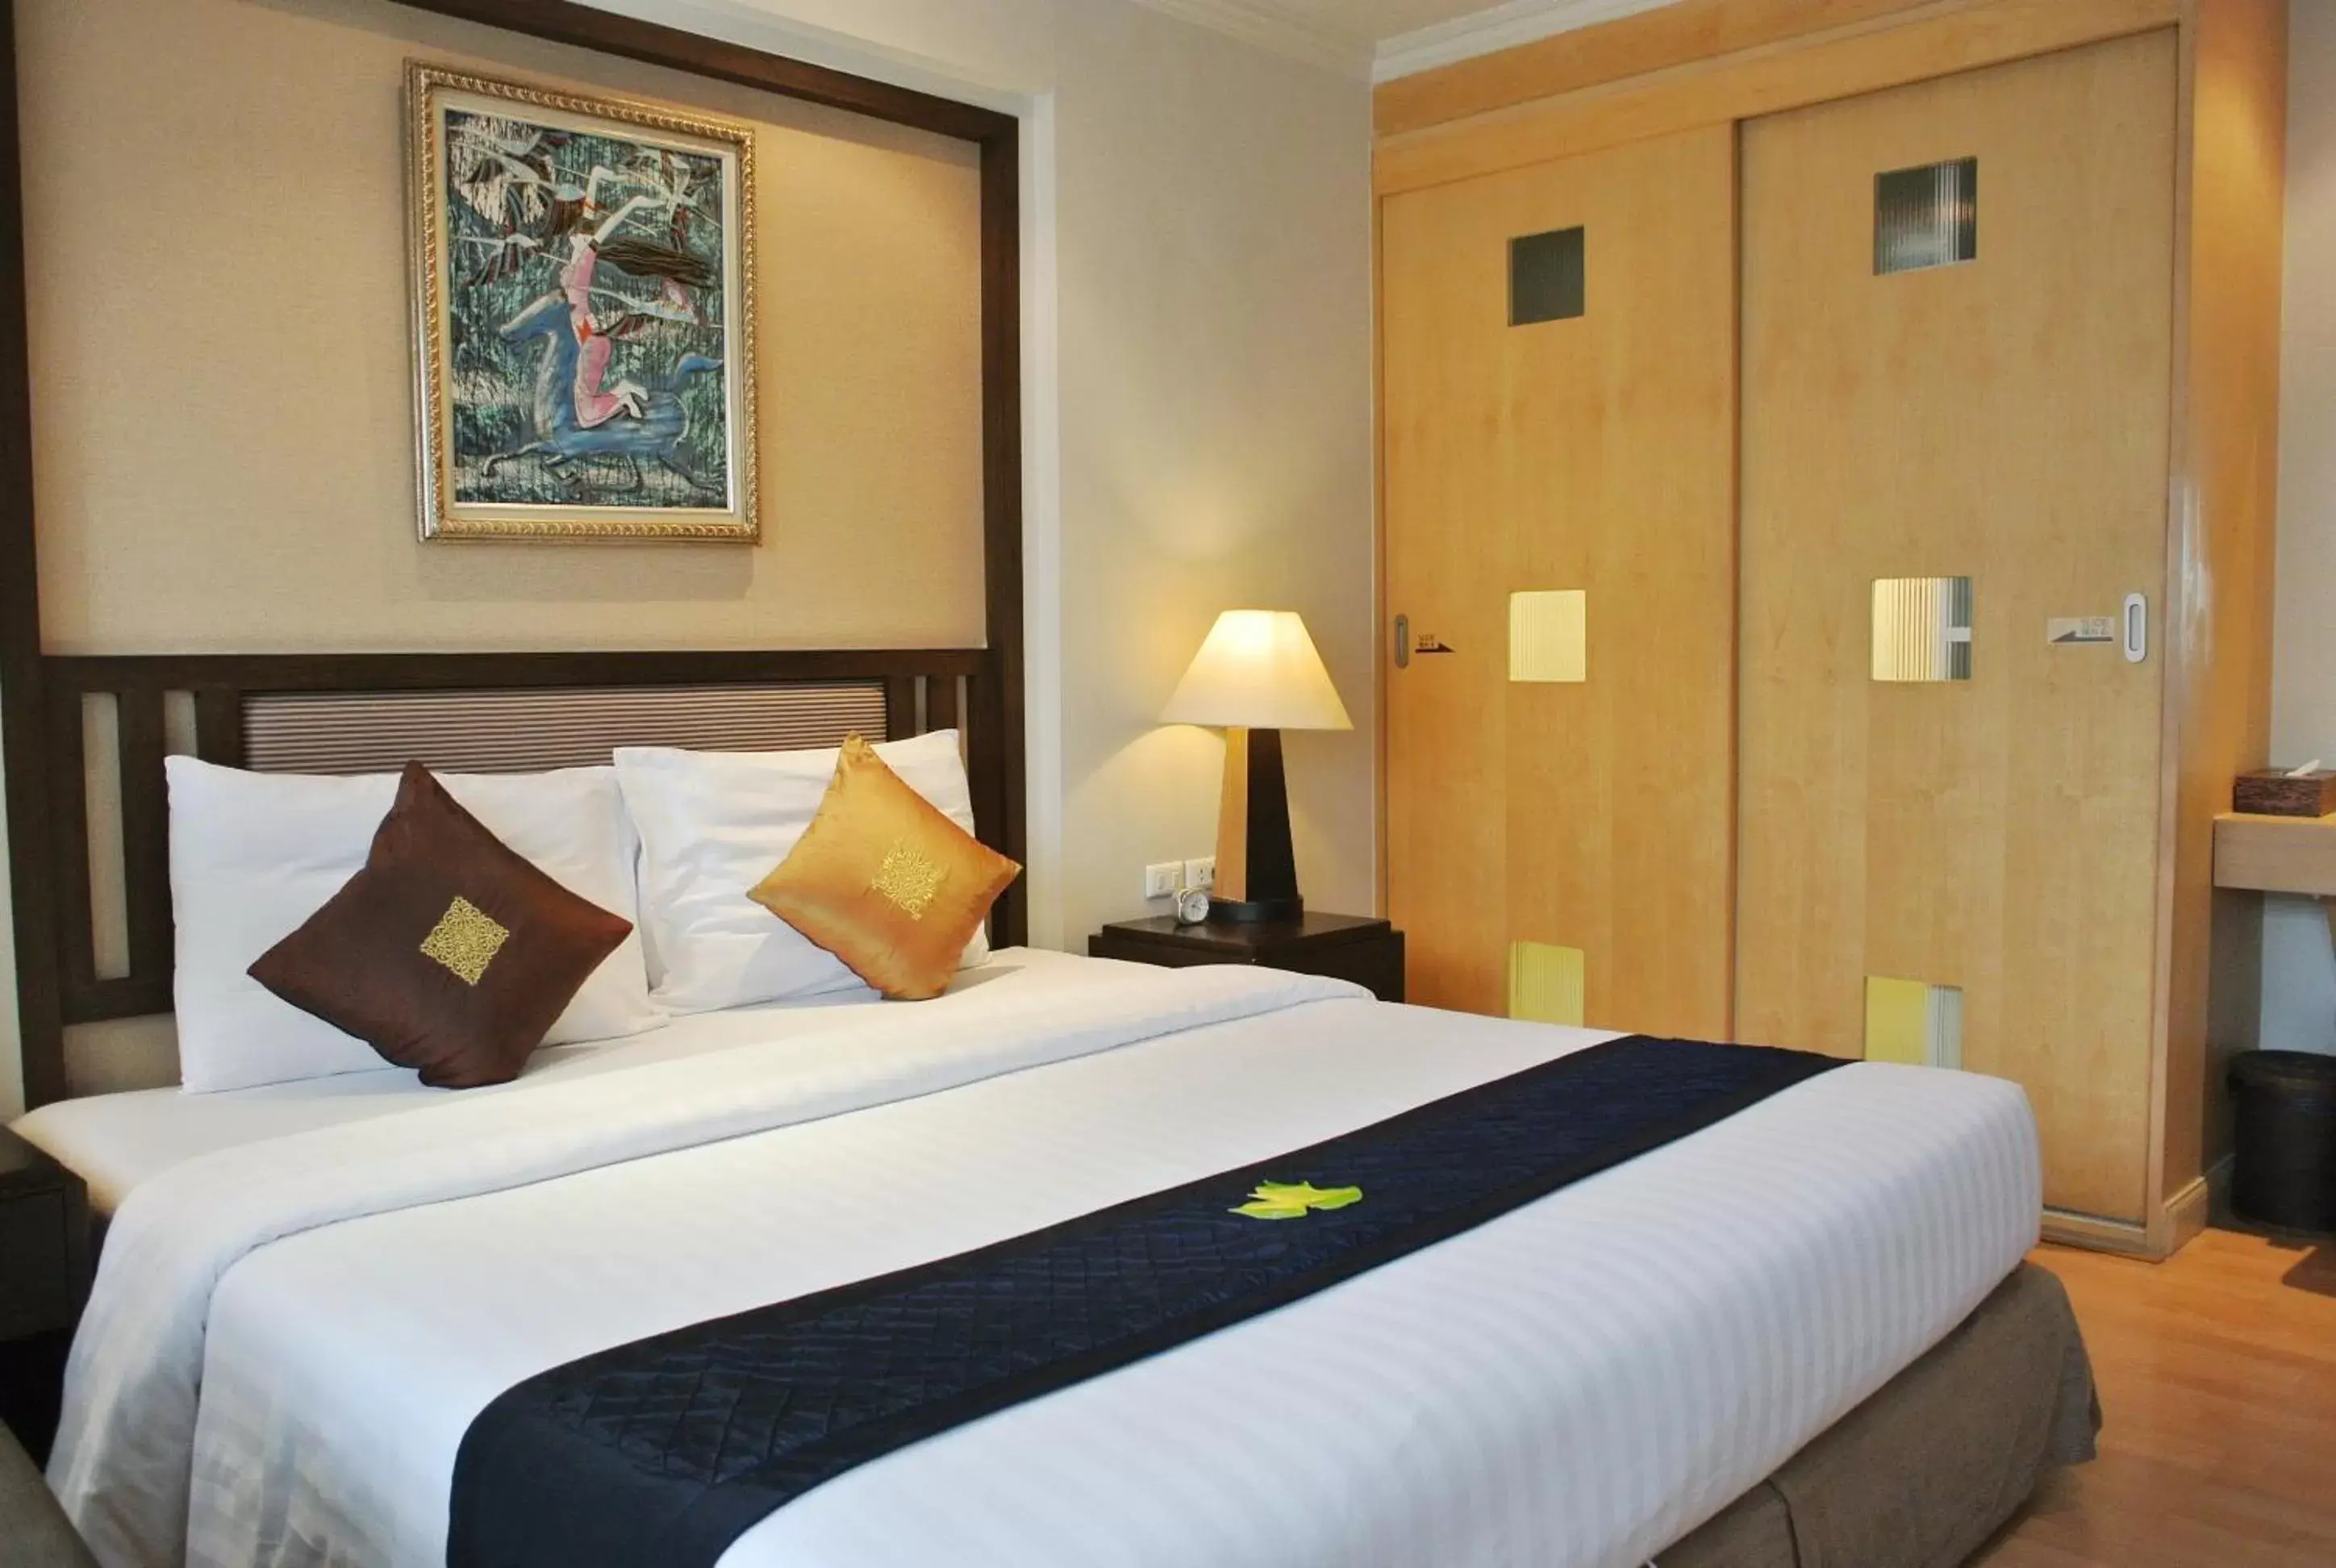 Executive Suite in The Key Bangkok Hotel